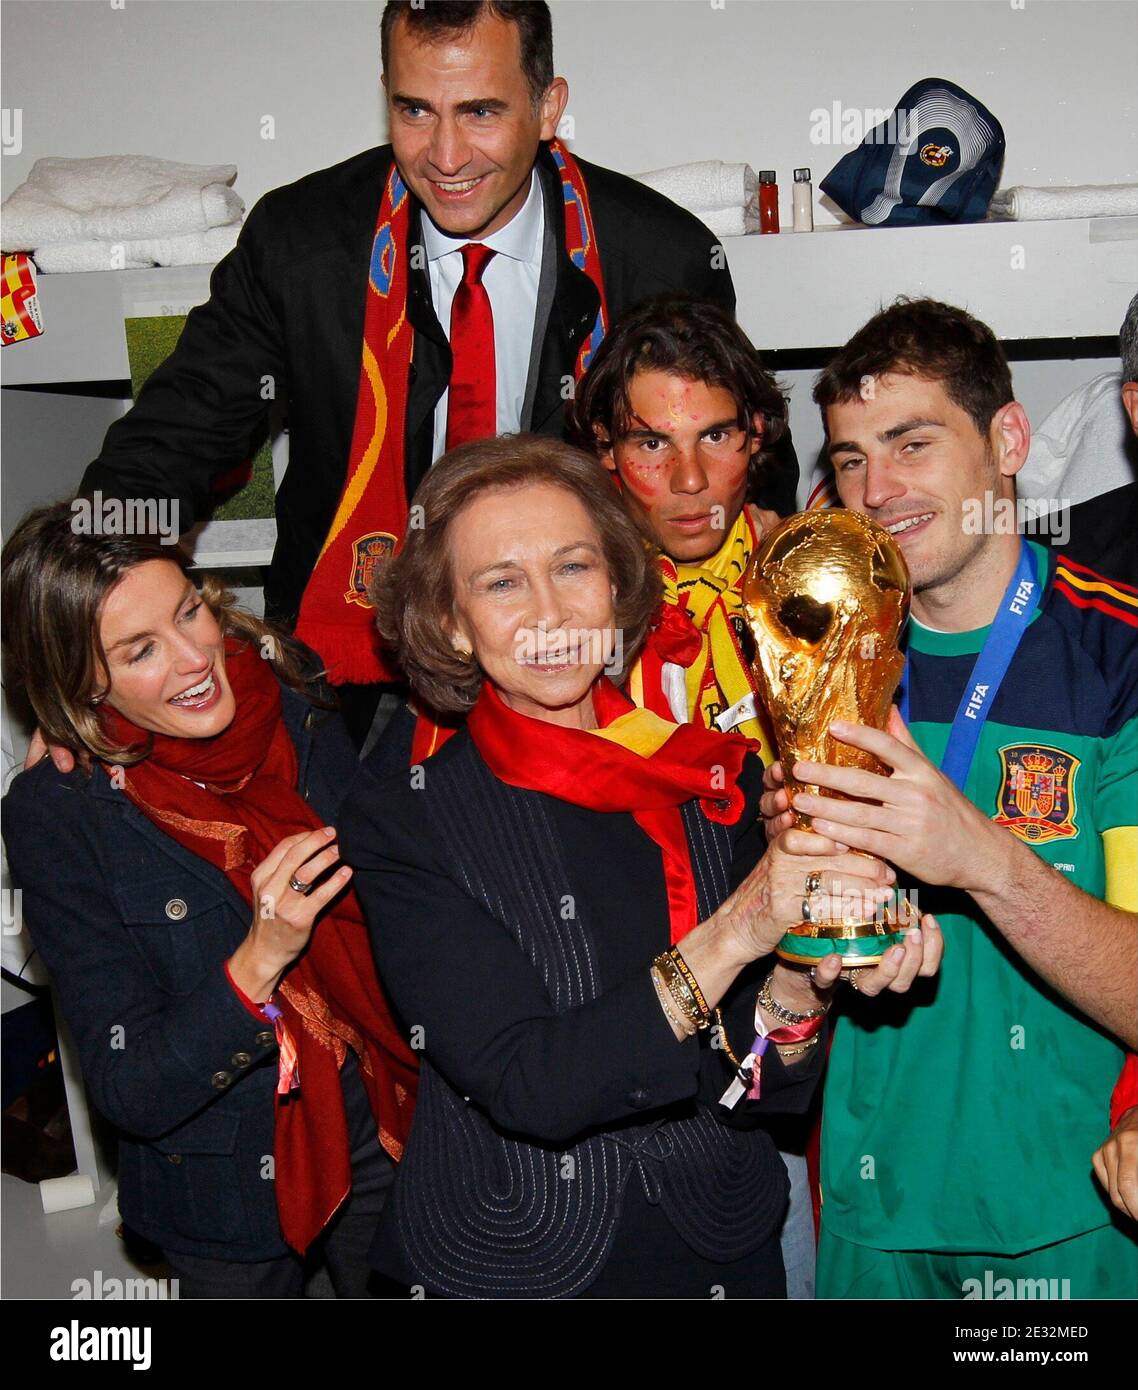 Spainish Crown Princess Letizia, Queen Sofia, Crown Prince Felipe, Rafael Nadal and Goalkeeper Iker Casillas celebrates the victory in the Spanish dressing room after Spanish football tam won the 2010 FIFA World Cup at Soccer City Stadium in Johannesburg, South Africa, on July 11, 2010. Photo by Pool/Almagro/ABACAPRESS.COM Stock Photo